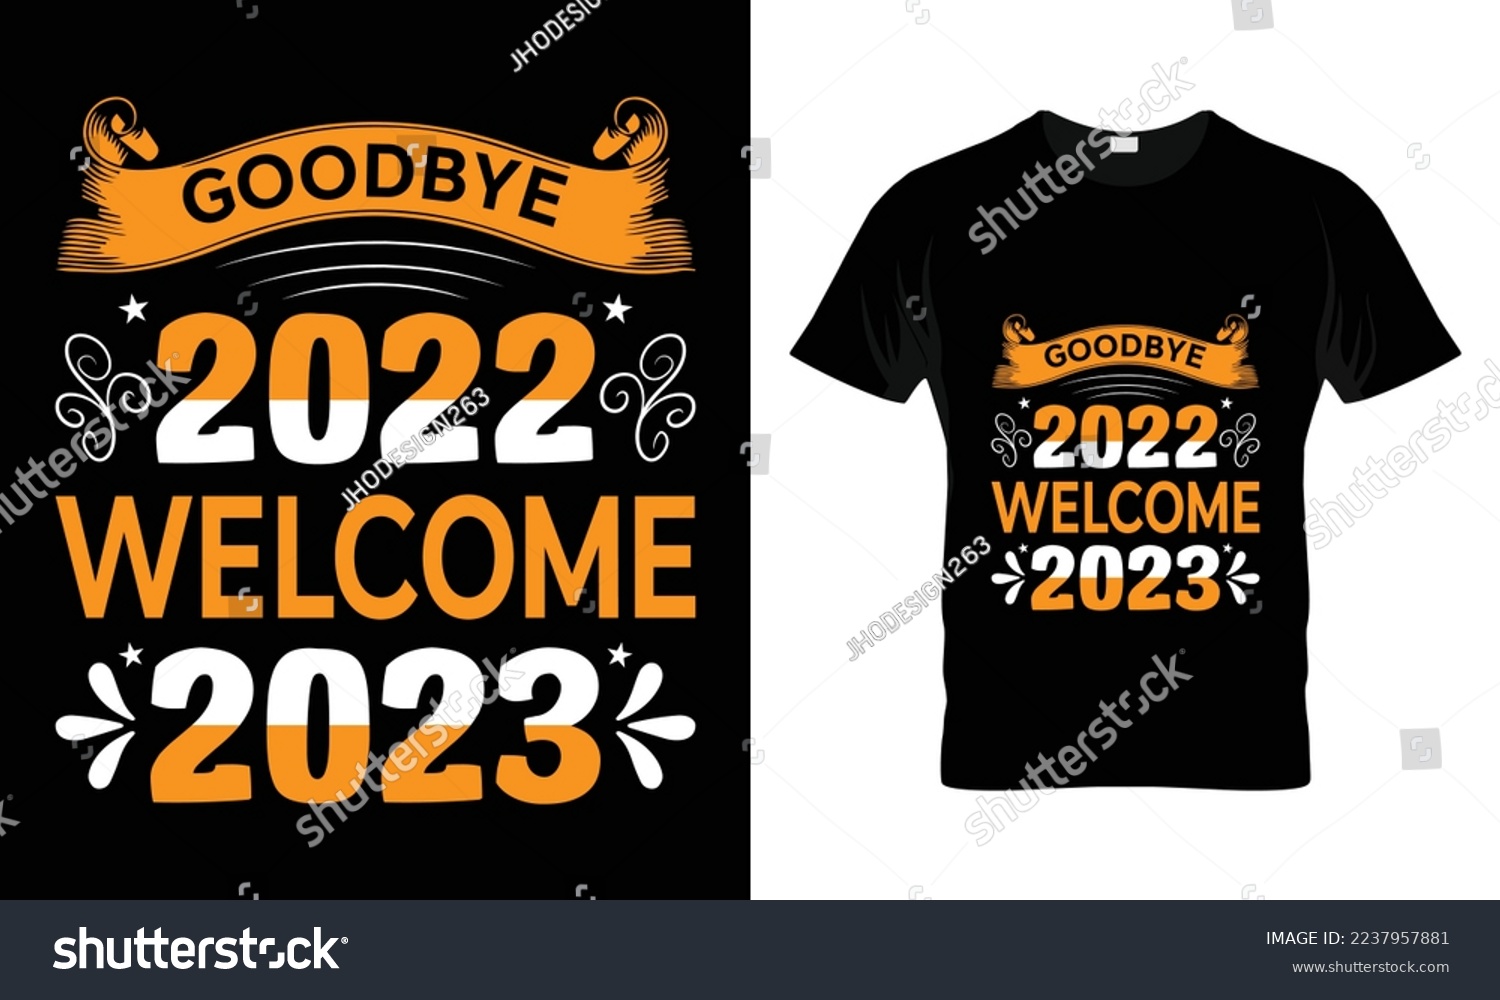 SVG of Goodbye 2022 welcome 2023 design template vector and typography.
Ready for t-shirt, mug,gift and other printing,2023 svg design,New Year Stickers quotes t shirt designs
Happy new year svg.
 svg